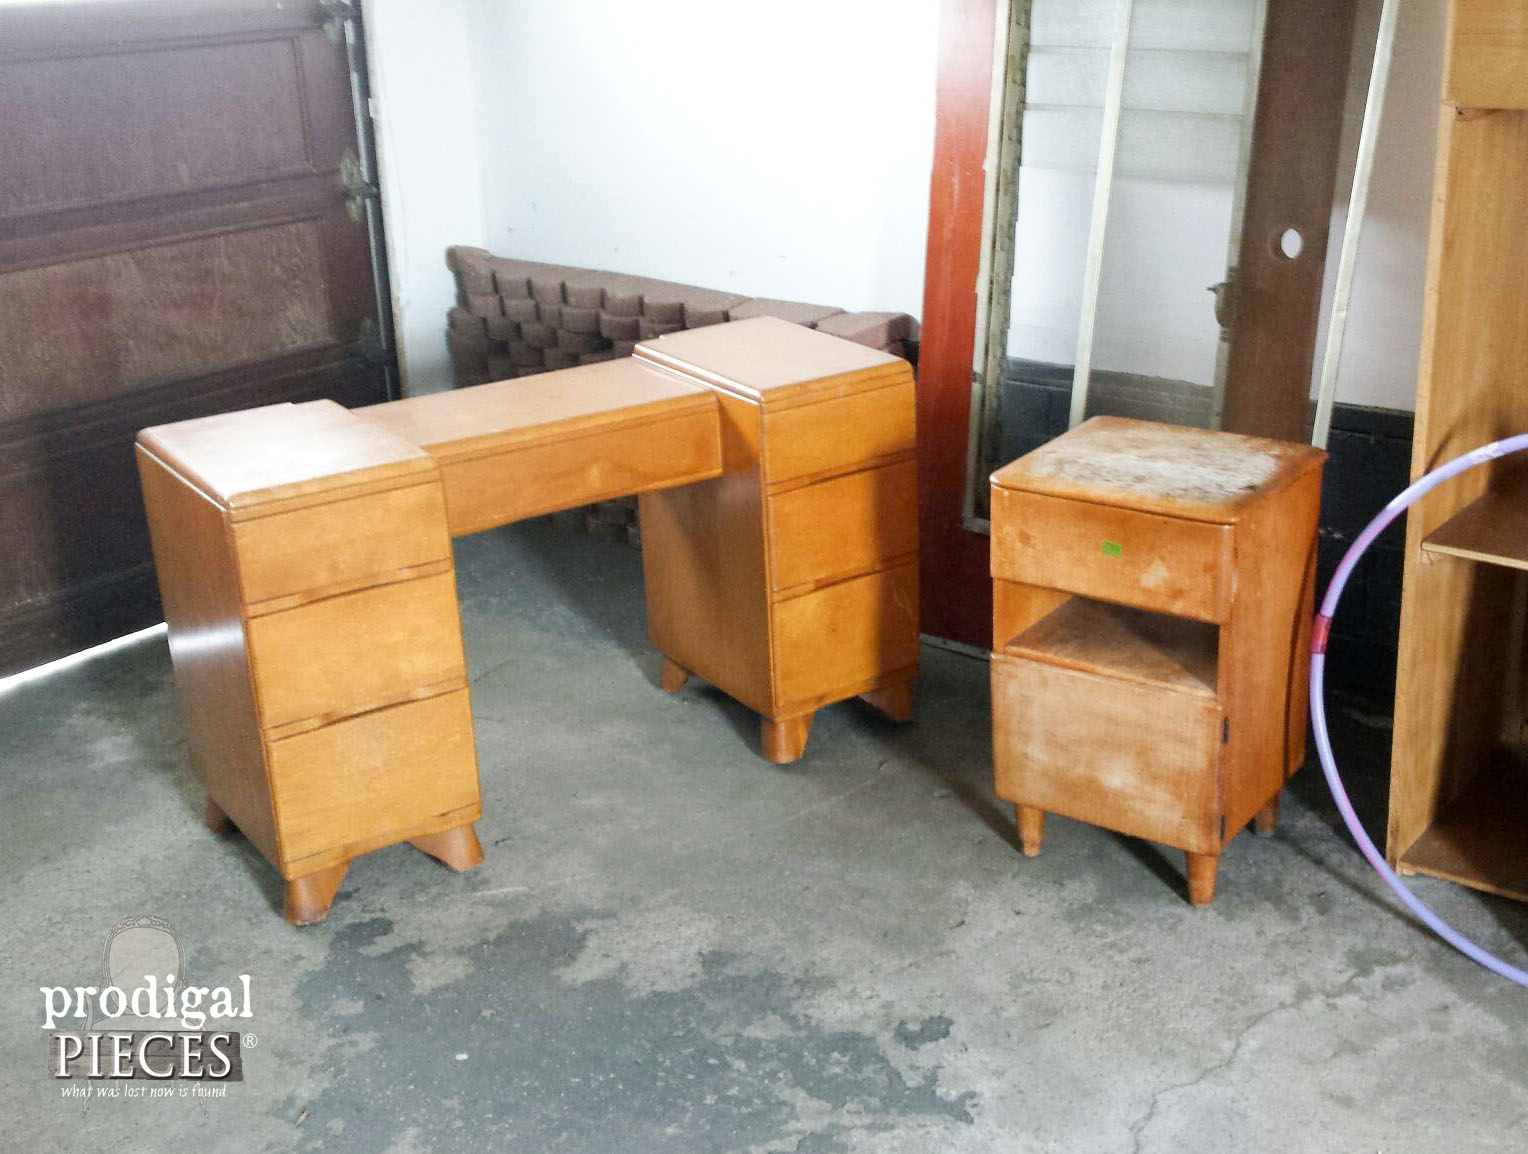 Art Deco Furniture in Need of Love by Prodigal Pieces | www.prodigalpieces.com